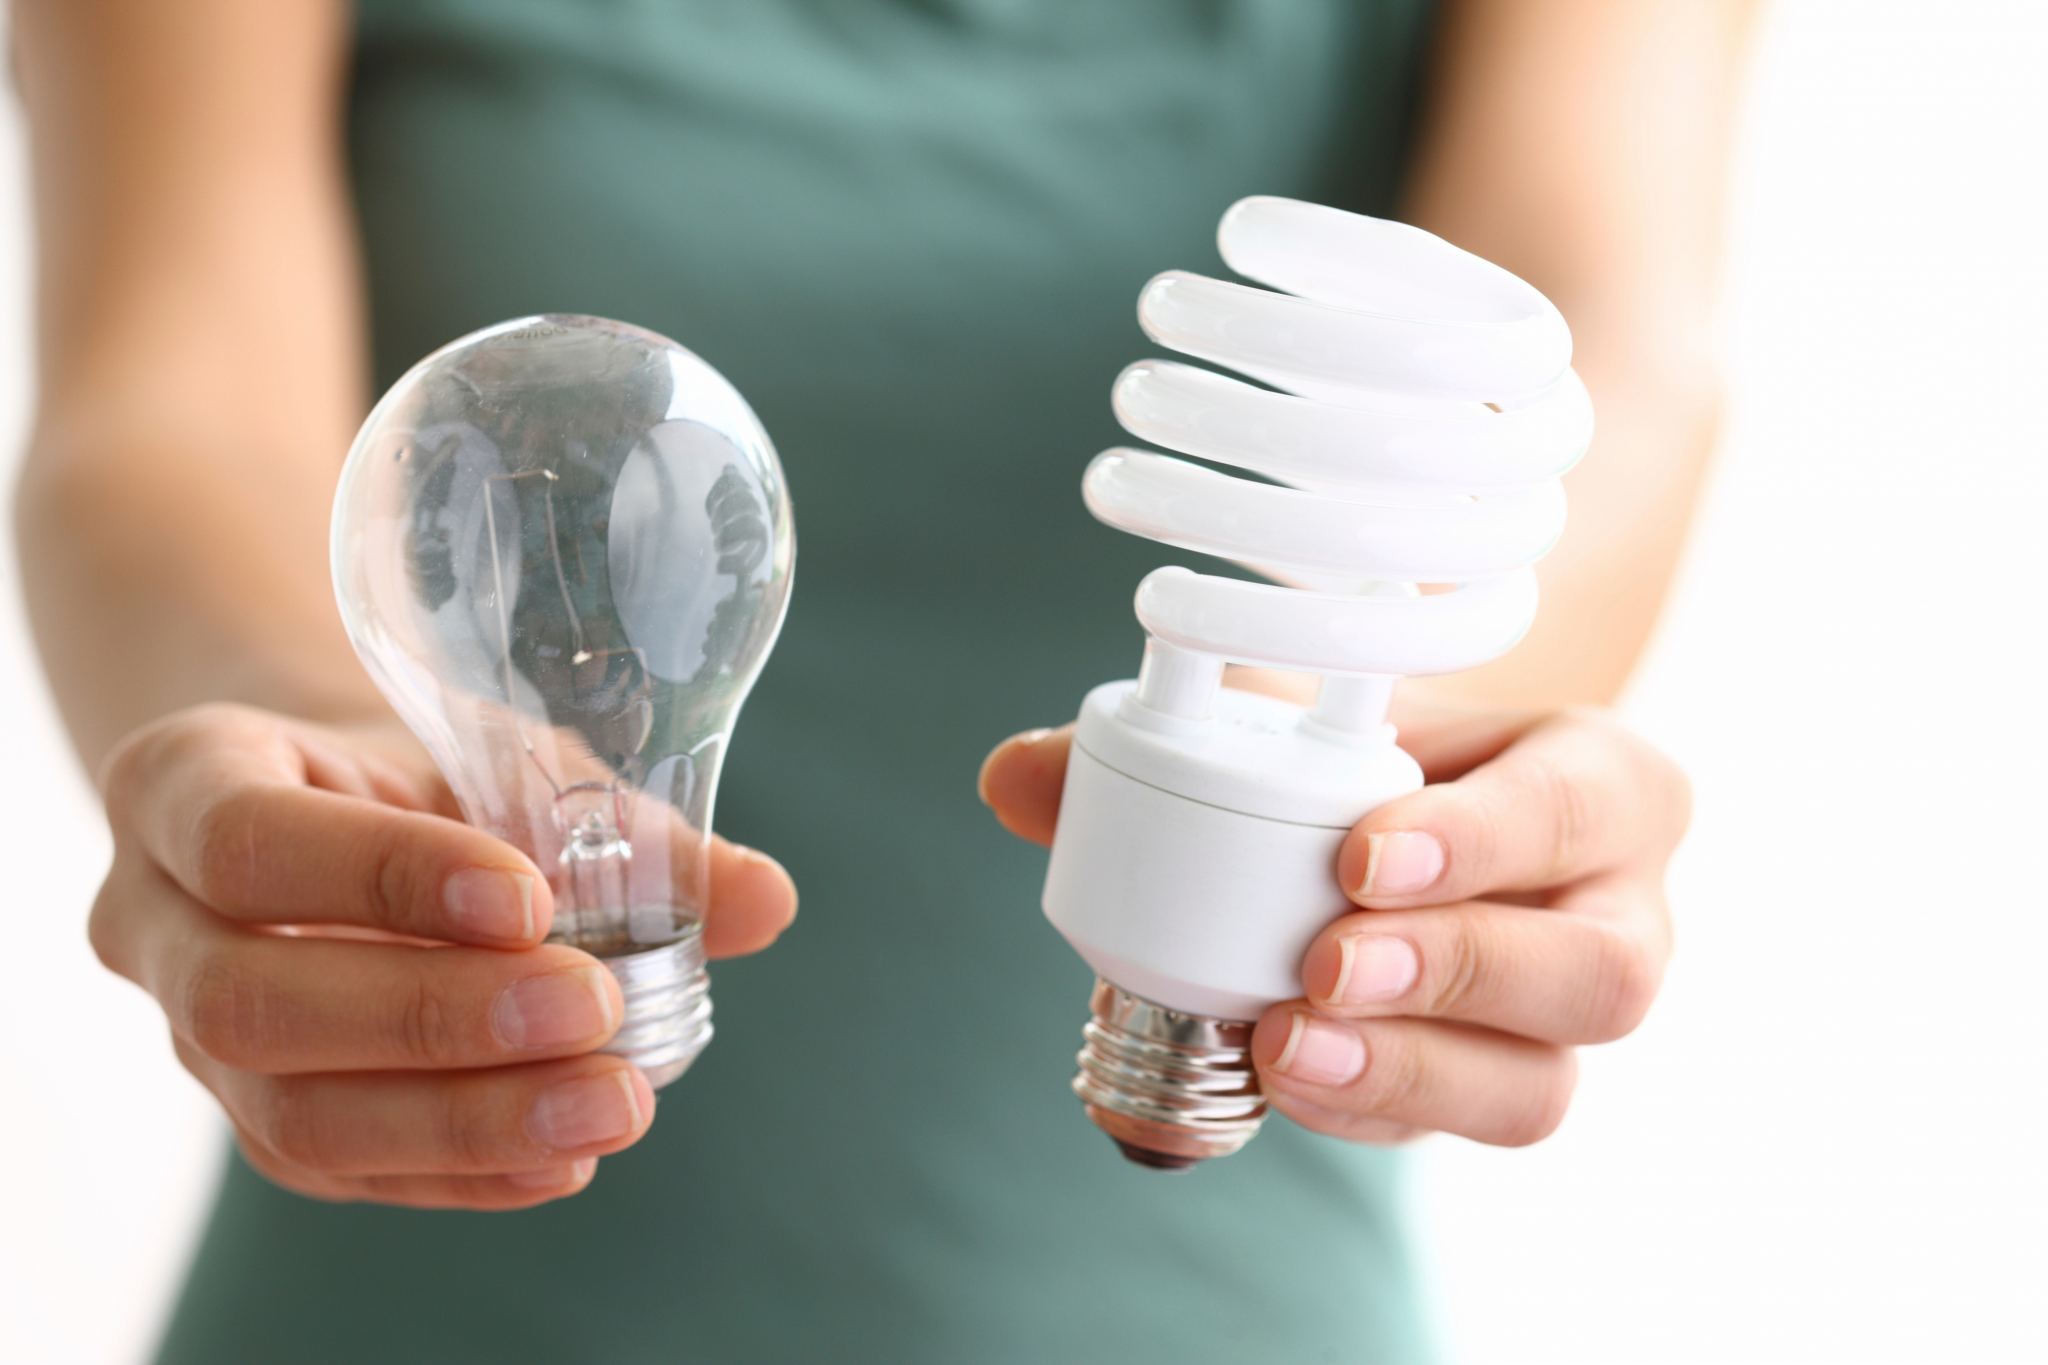 What Type Of Energy Does A Light Bulb Use